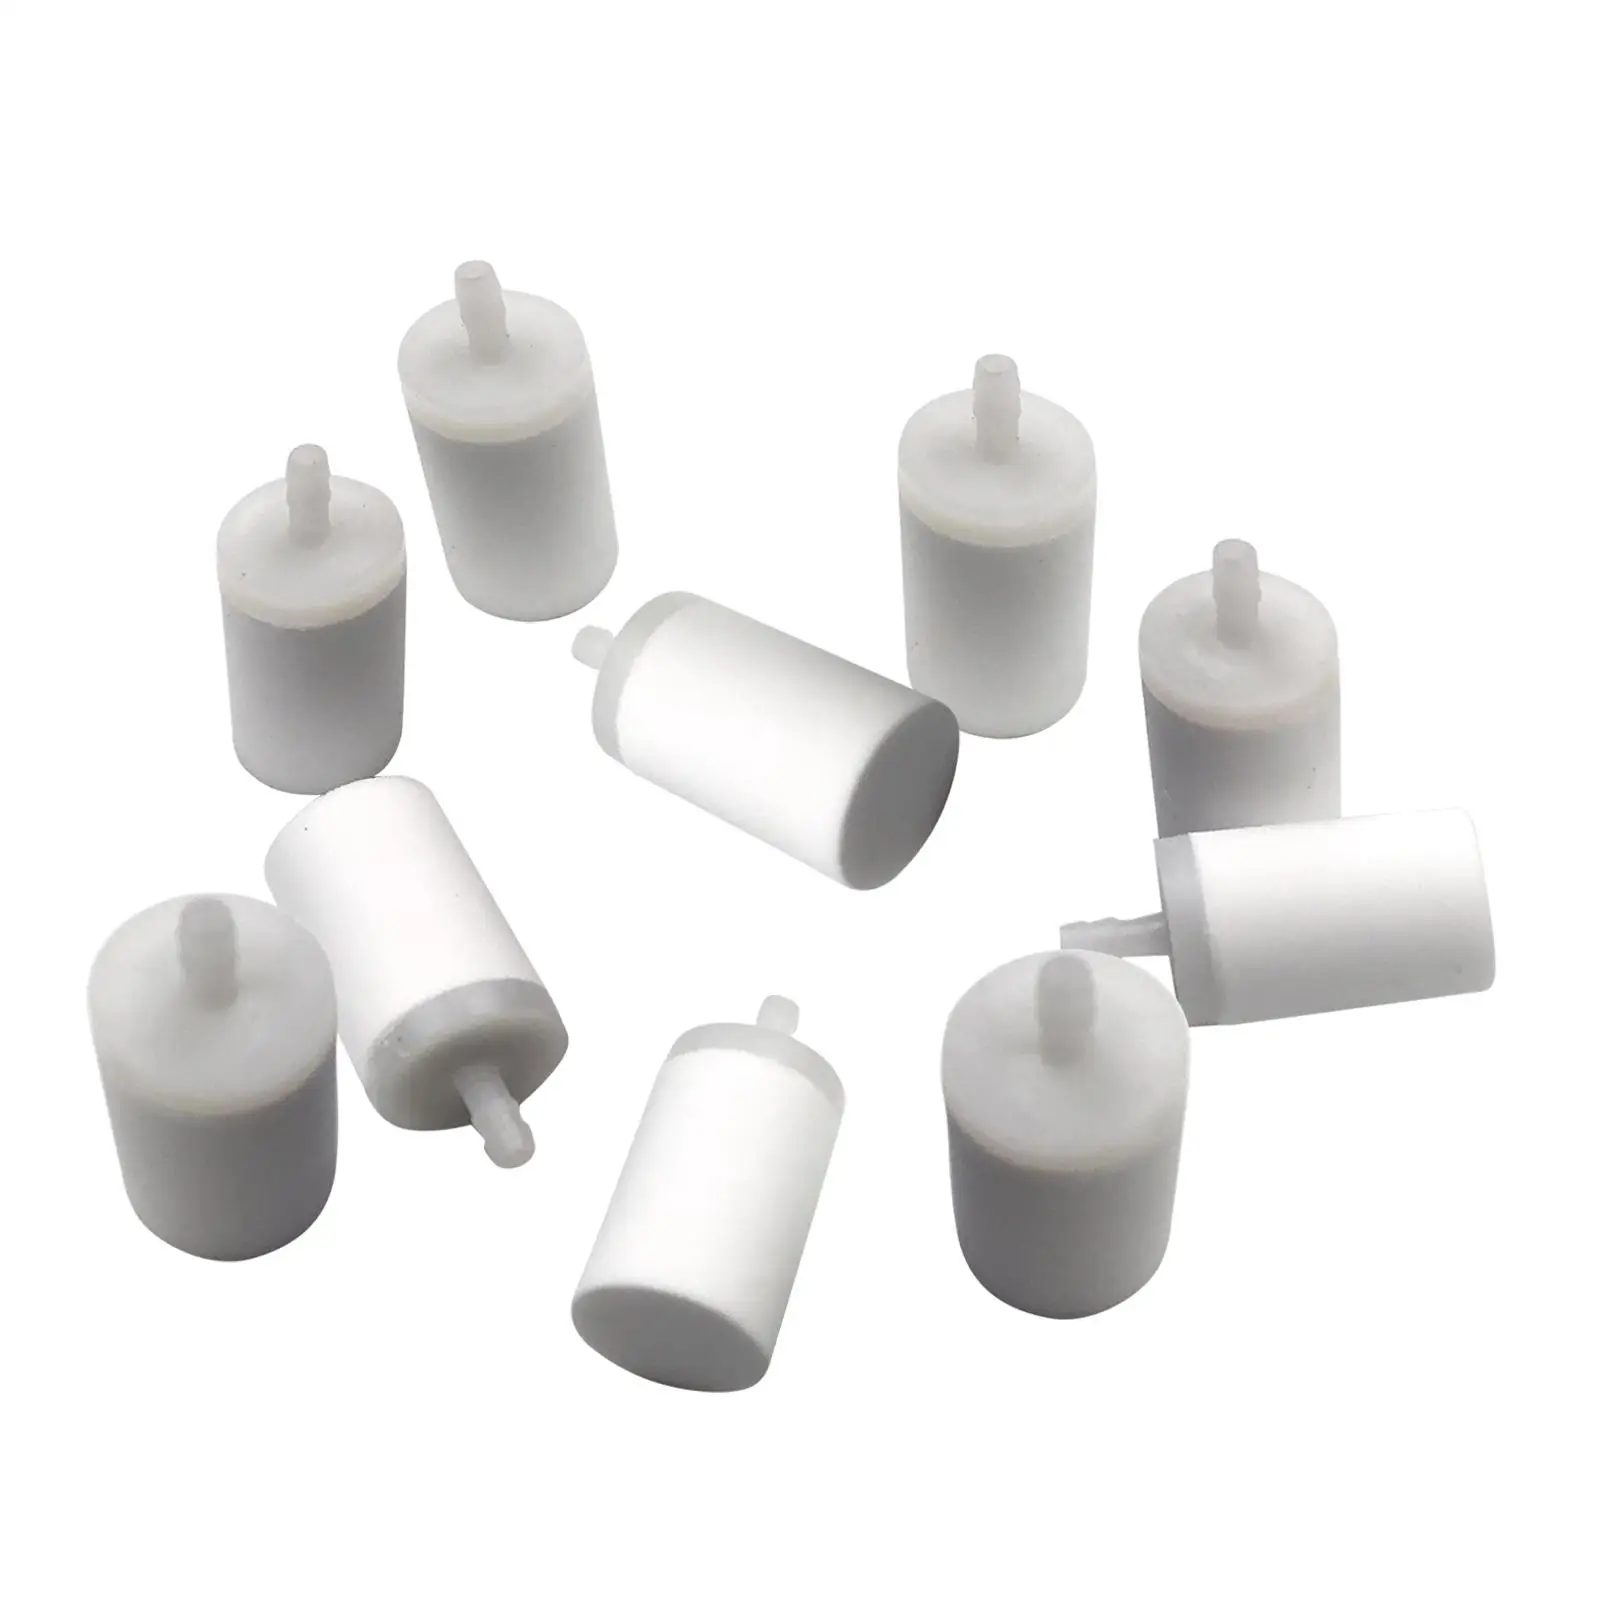 10 Pack 5034432-01 Fuel Filters   50 5 61 268 272 XP 345 350 351 353 String  Brush Cuter Pole  Edger